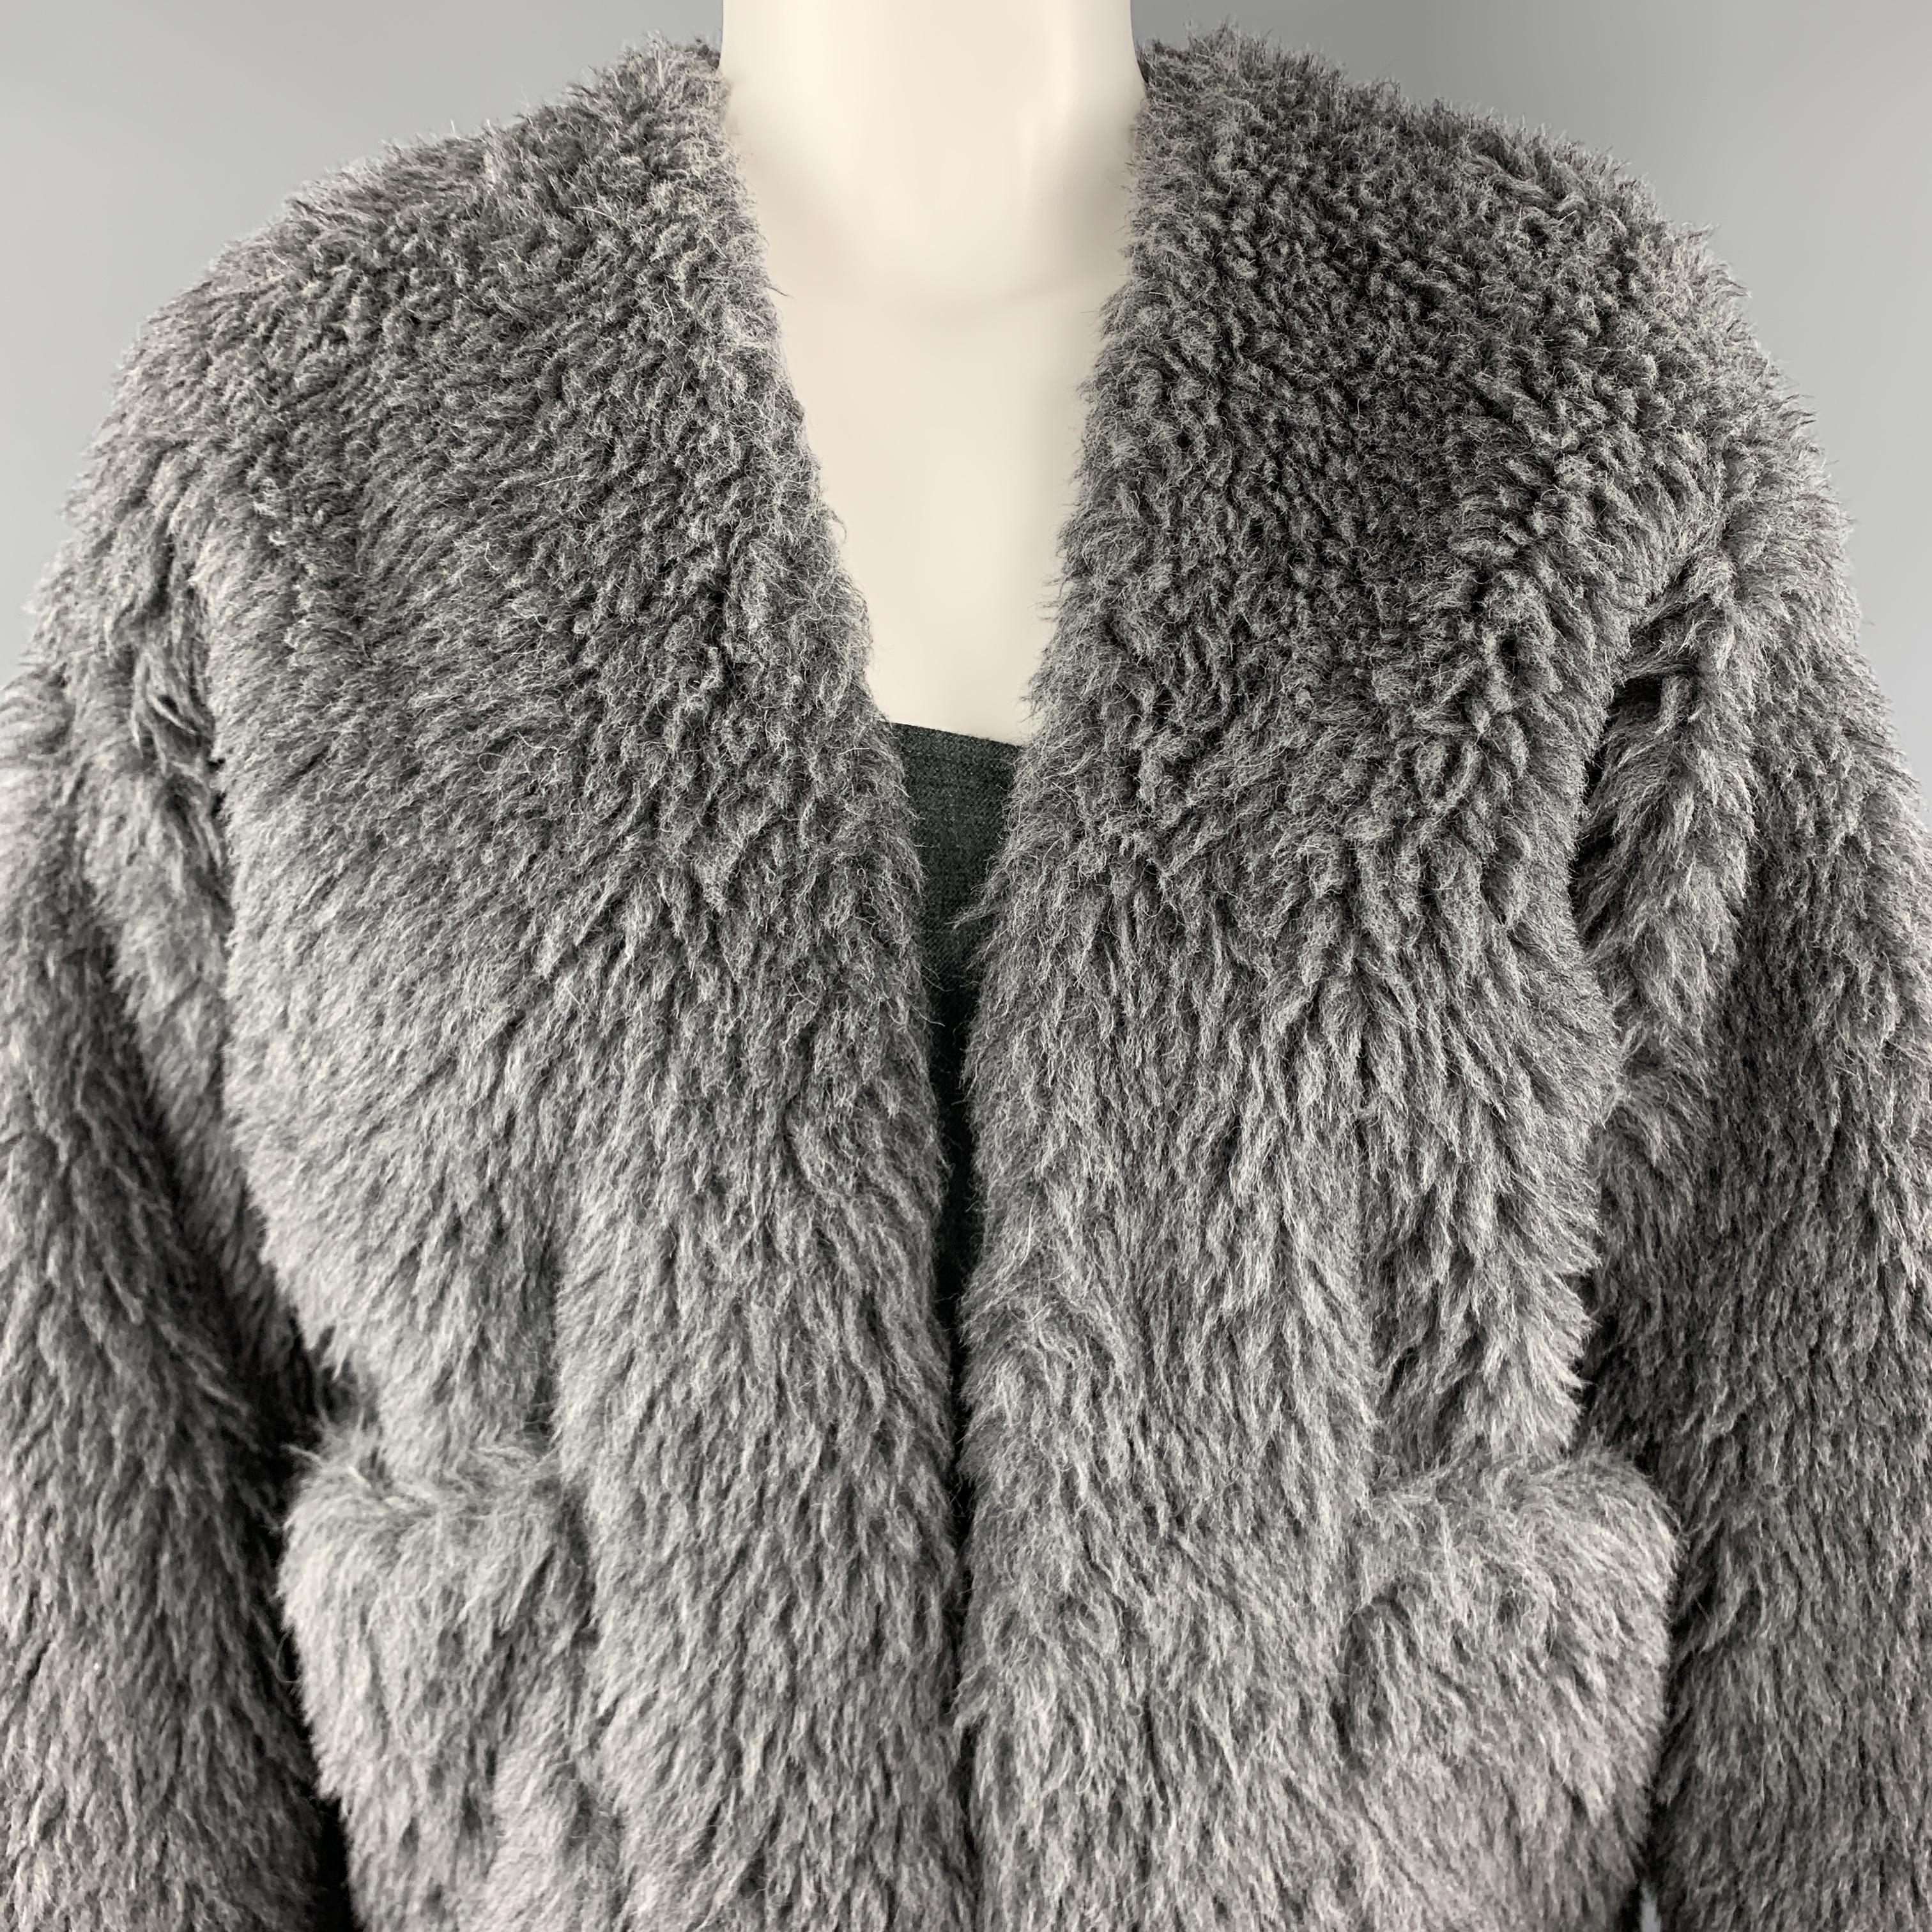 TOUJOURS jacket comes in gray alpaca blend faux fur with a V neck, hidden button closure, patch pockets, and silk blend liner. Made in Japan.

New with Tags.
Marked: S

Measurements:

Shoulder: 22 in.
Bust: 48 in.
Sleeve: 19 in.
Length: 25 in.